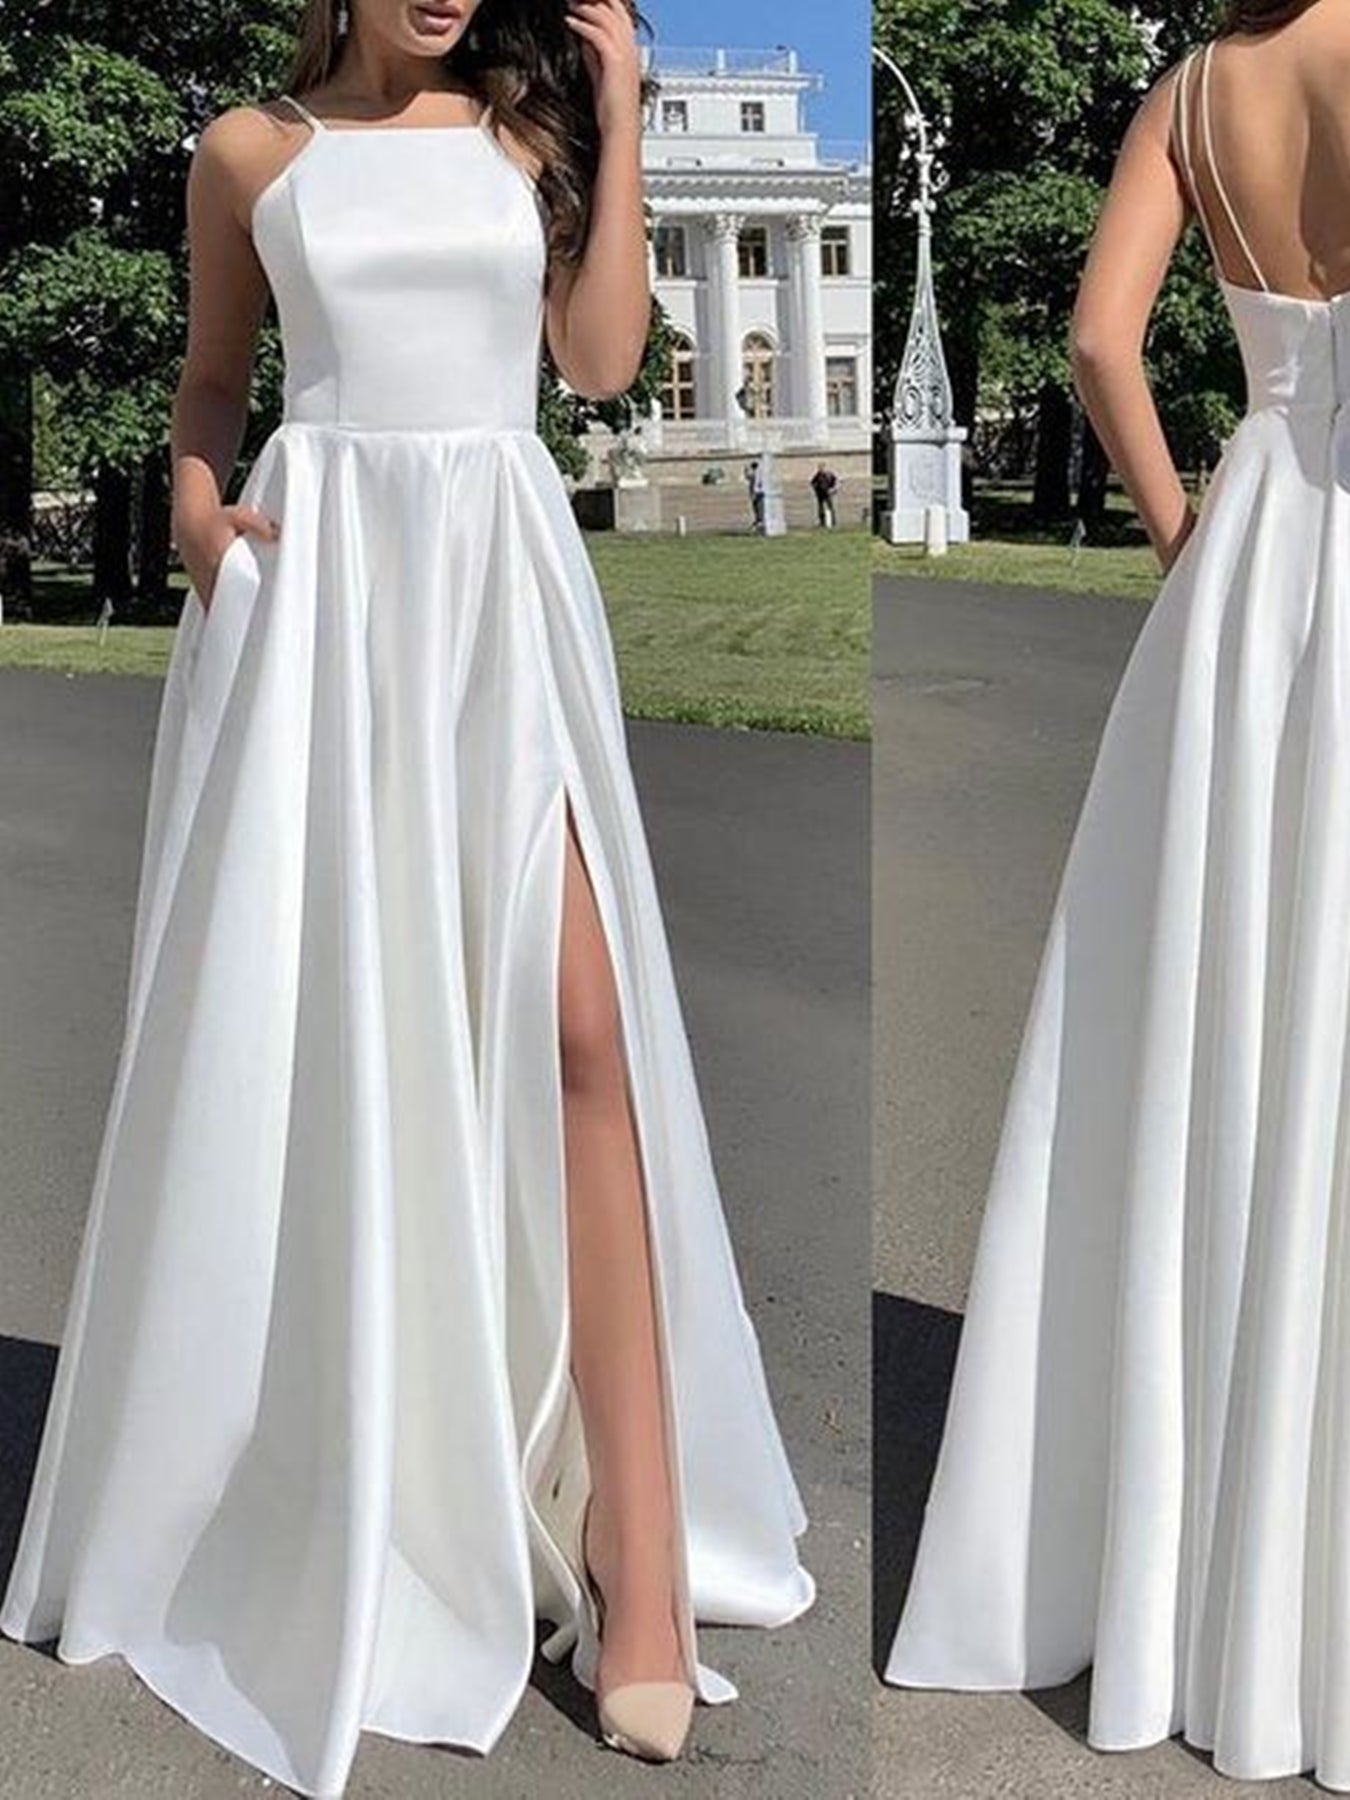 Simple Open Back White Satin Long Prom Dresses with High Slit, Long White Formal Graduation Evening Dresses 